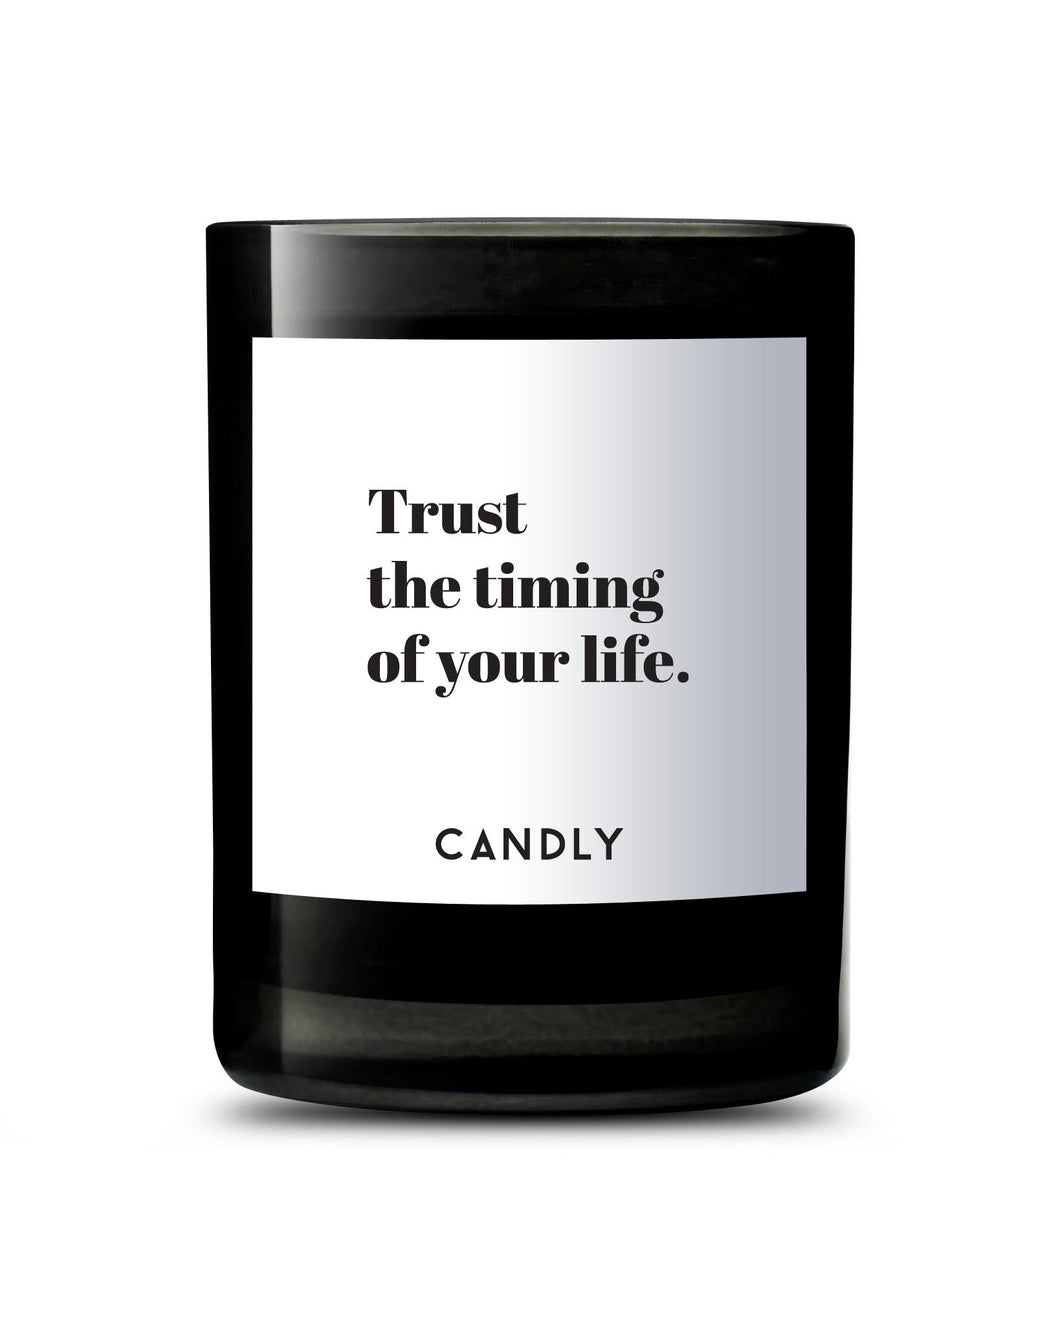 The Trust Candle